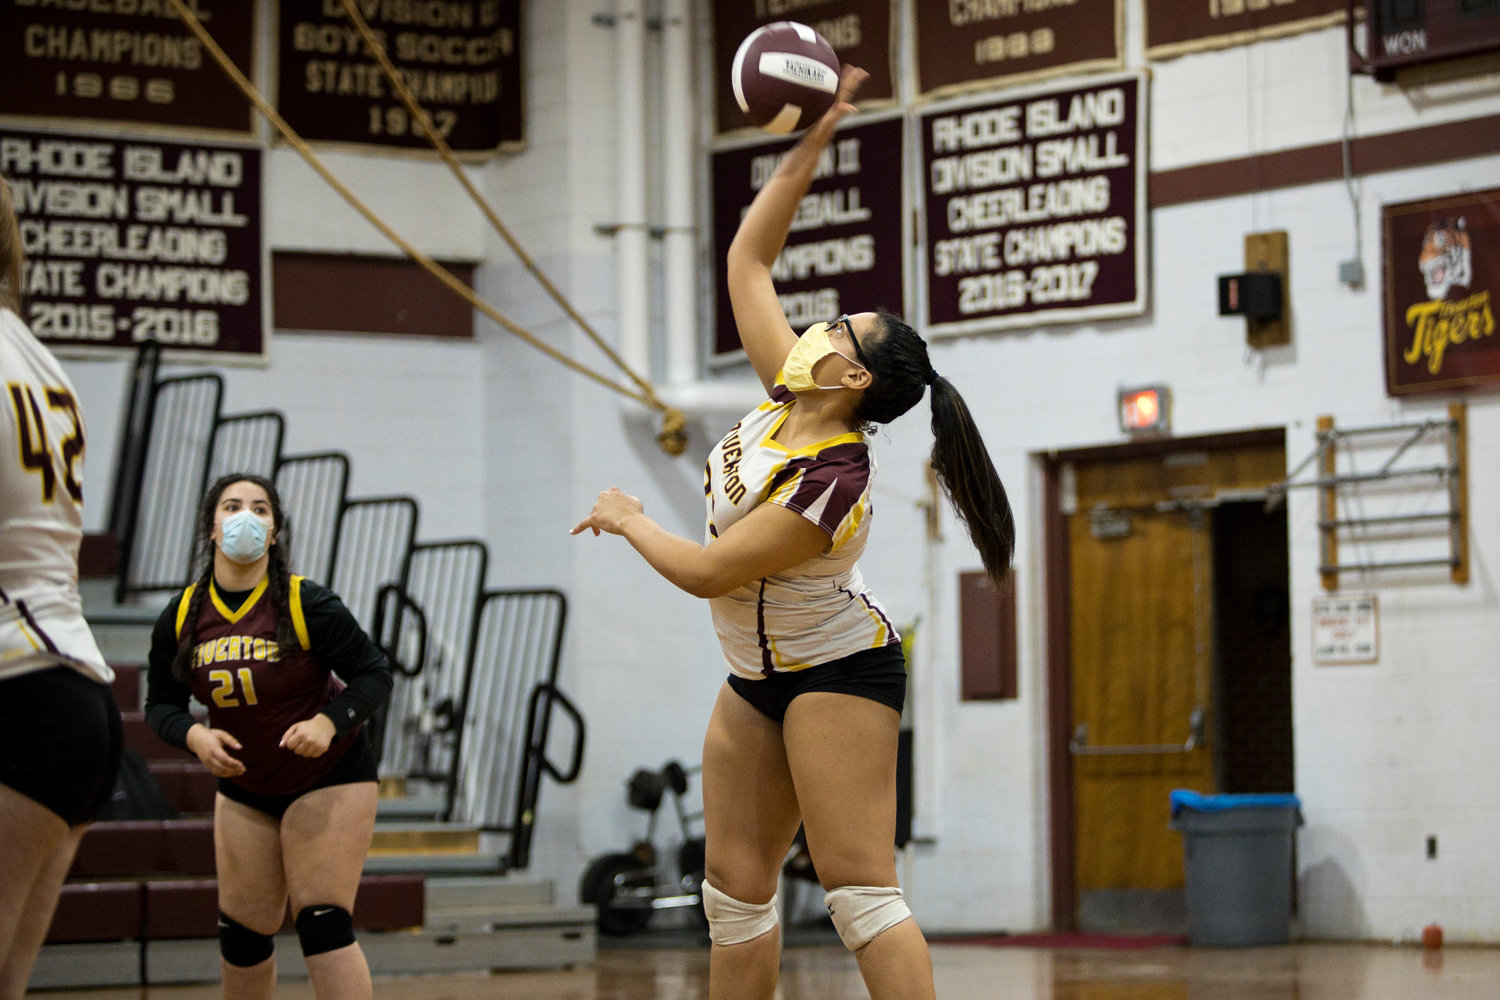 Olivia Miranda spikes the ball over the net during Tuesday night's
game against Paul Cuffee School.